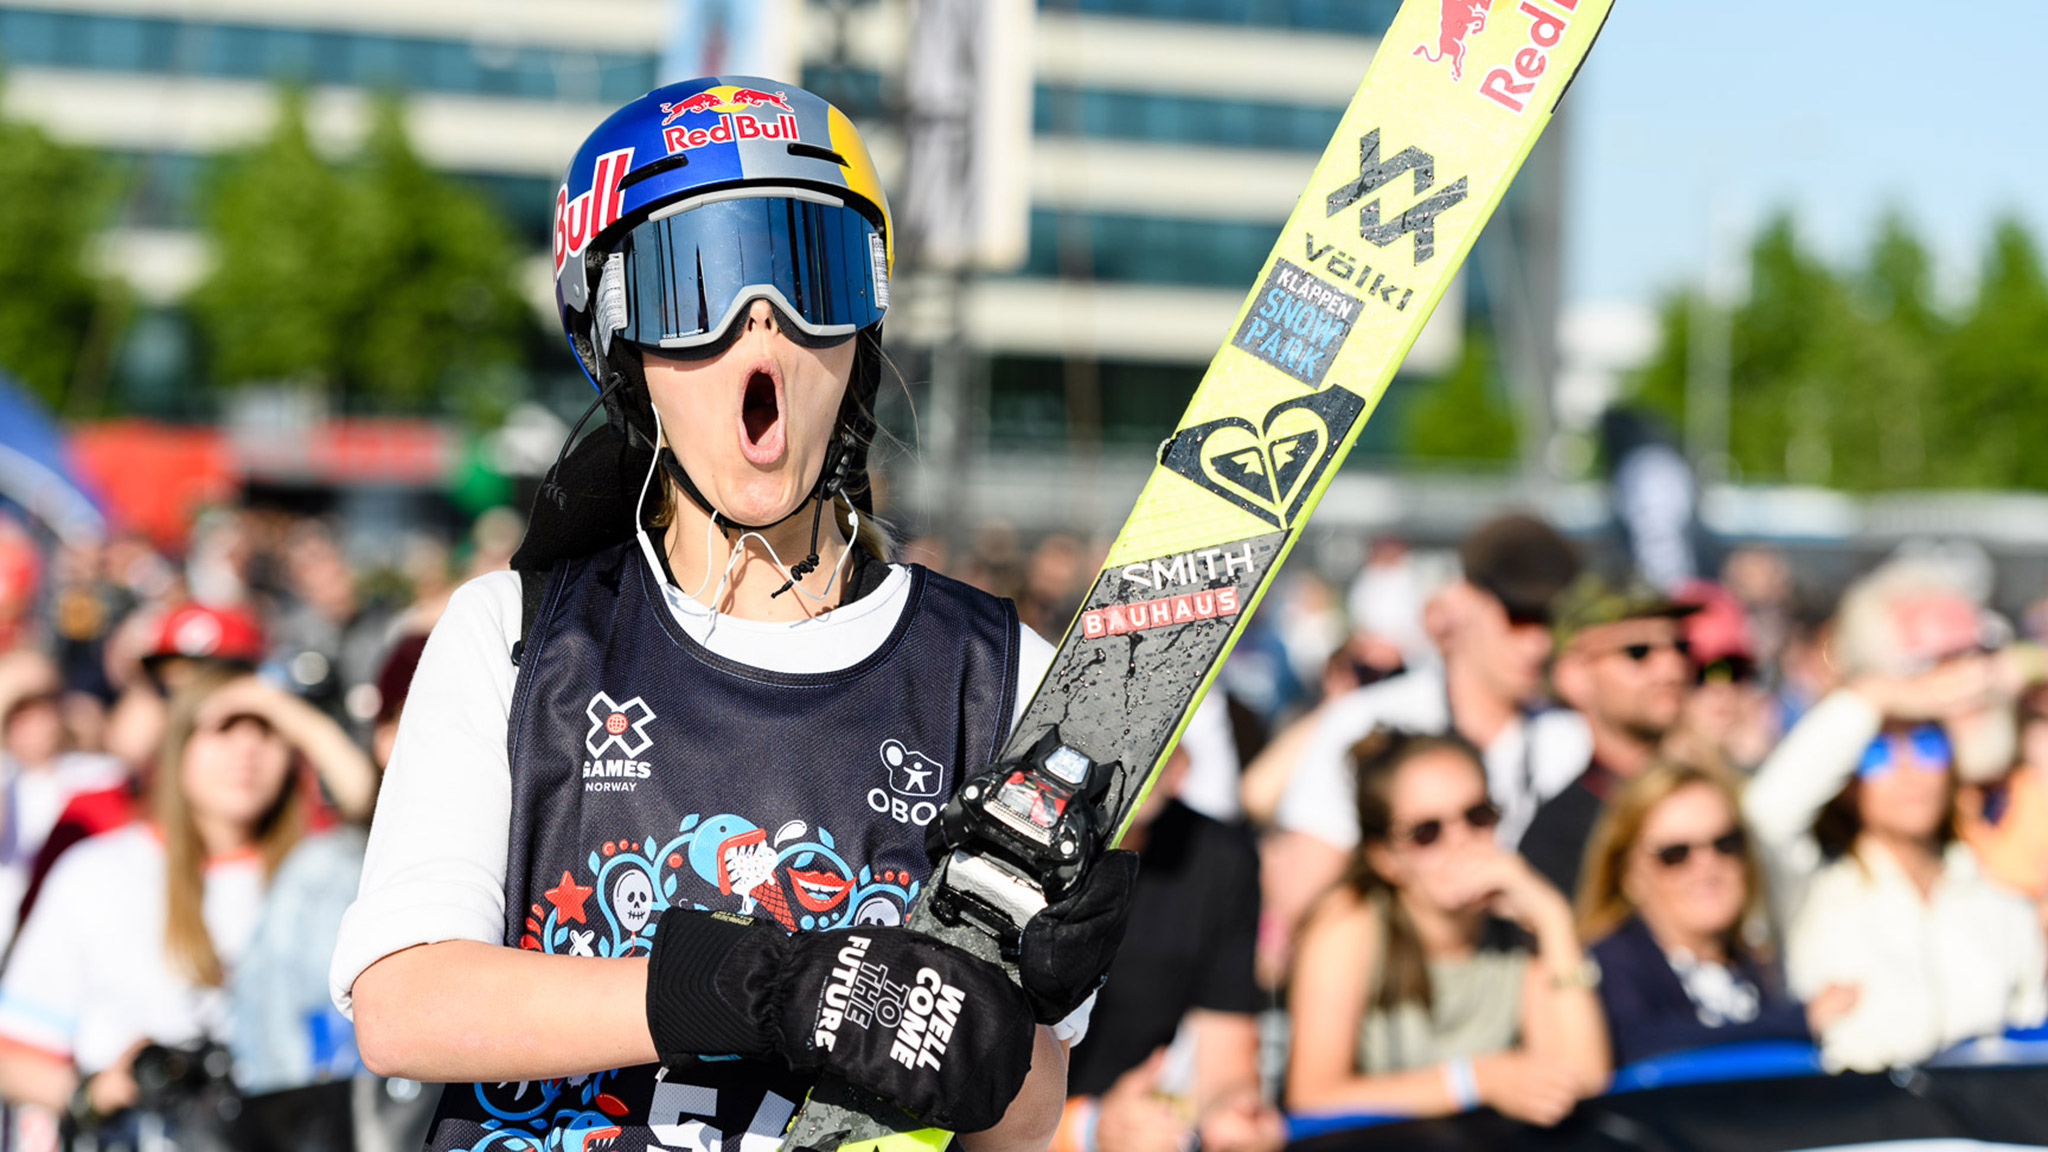 Day two of X Games Norway 2018 brought winter to the city, with an event card chock full of Women's and Men's Ski and Snowboard competitions, plus a mini music festival thrown in on the side. Here, 15-year-old Swedish skier Jennie-Lee Burmansson is seen reacting to winning Ski Big Air gold in her X Games debut.